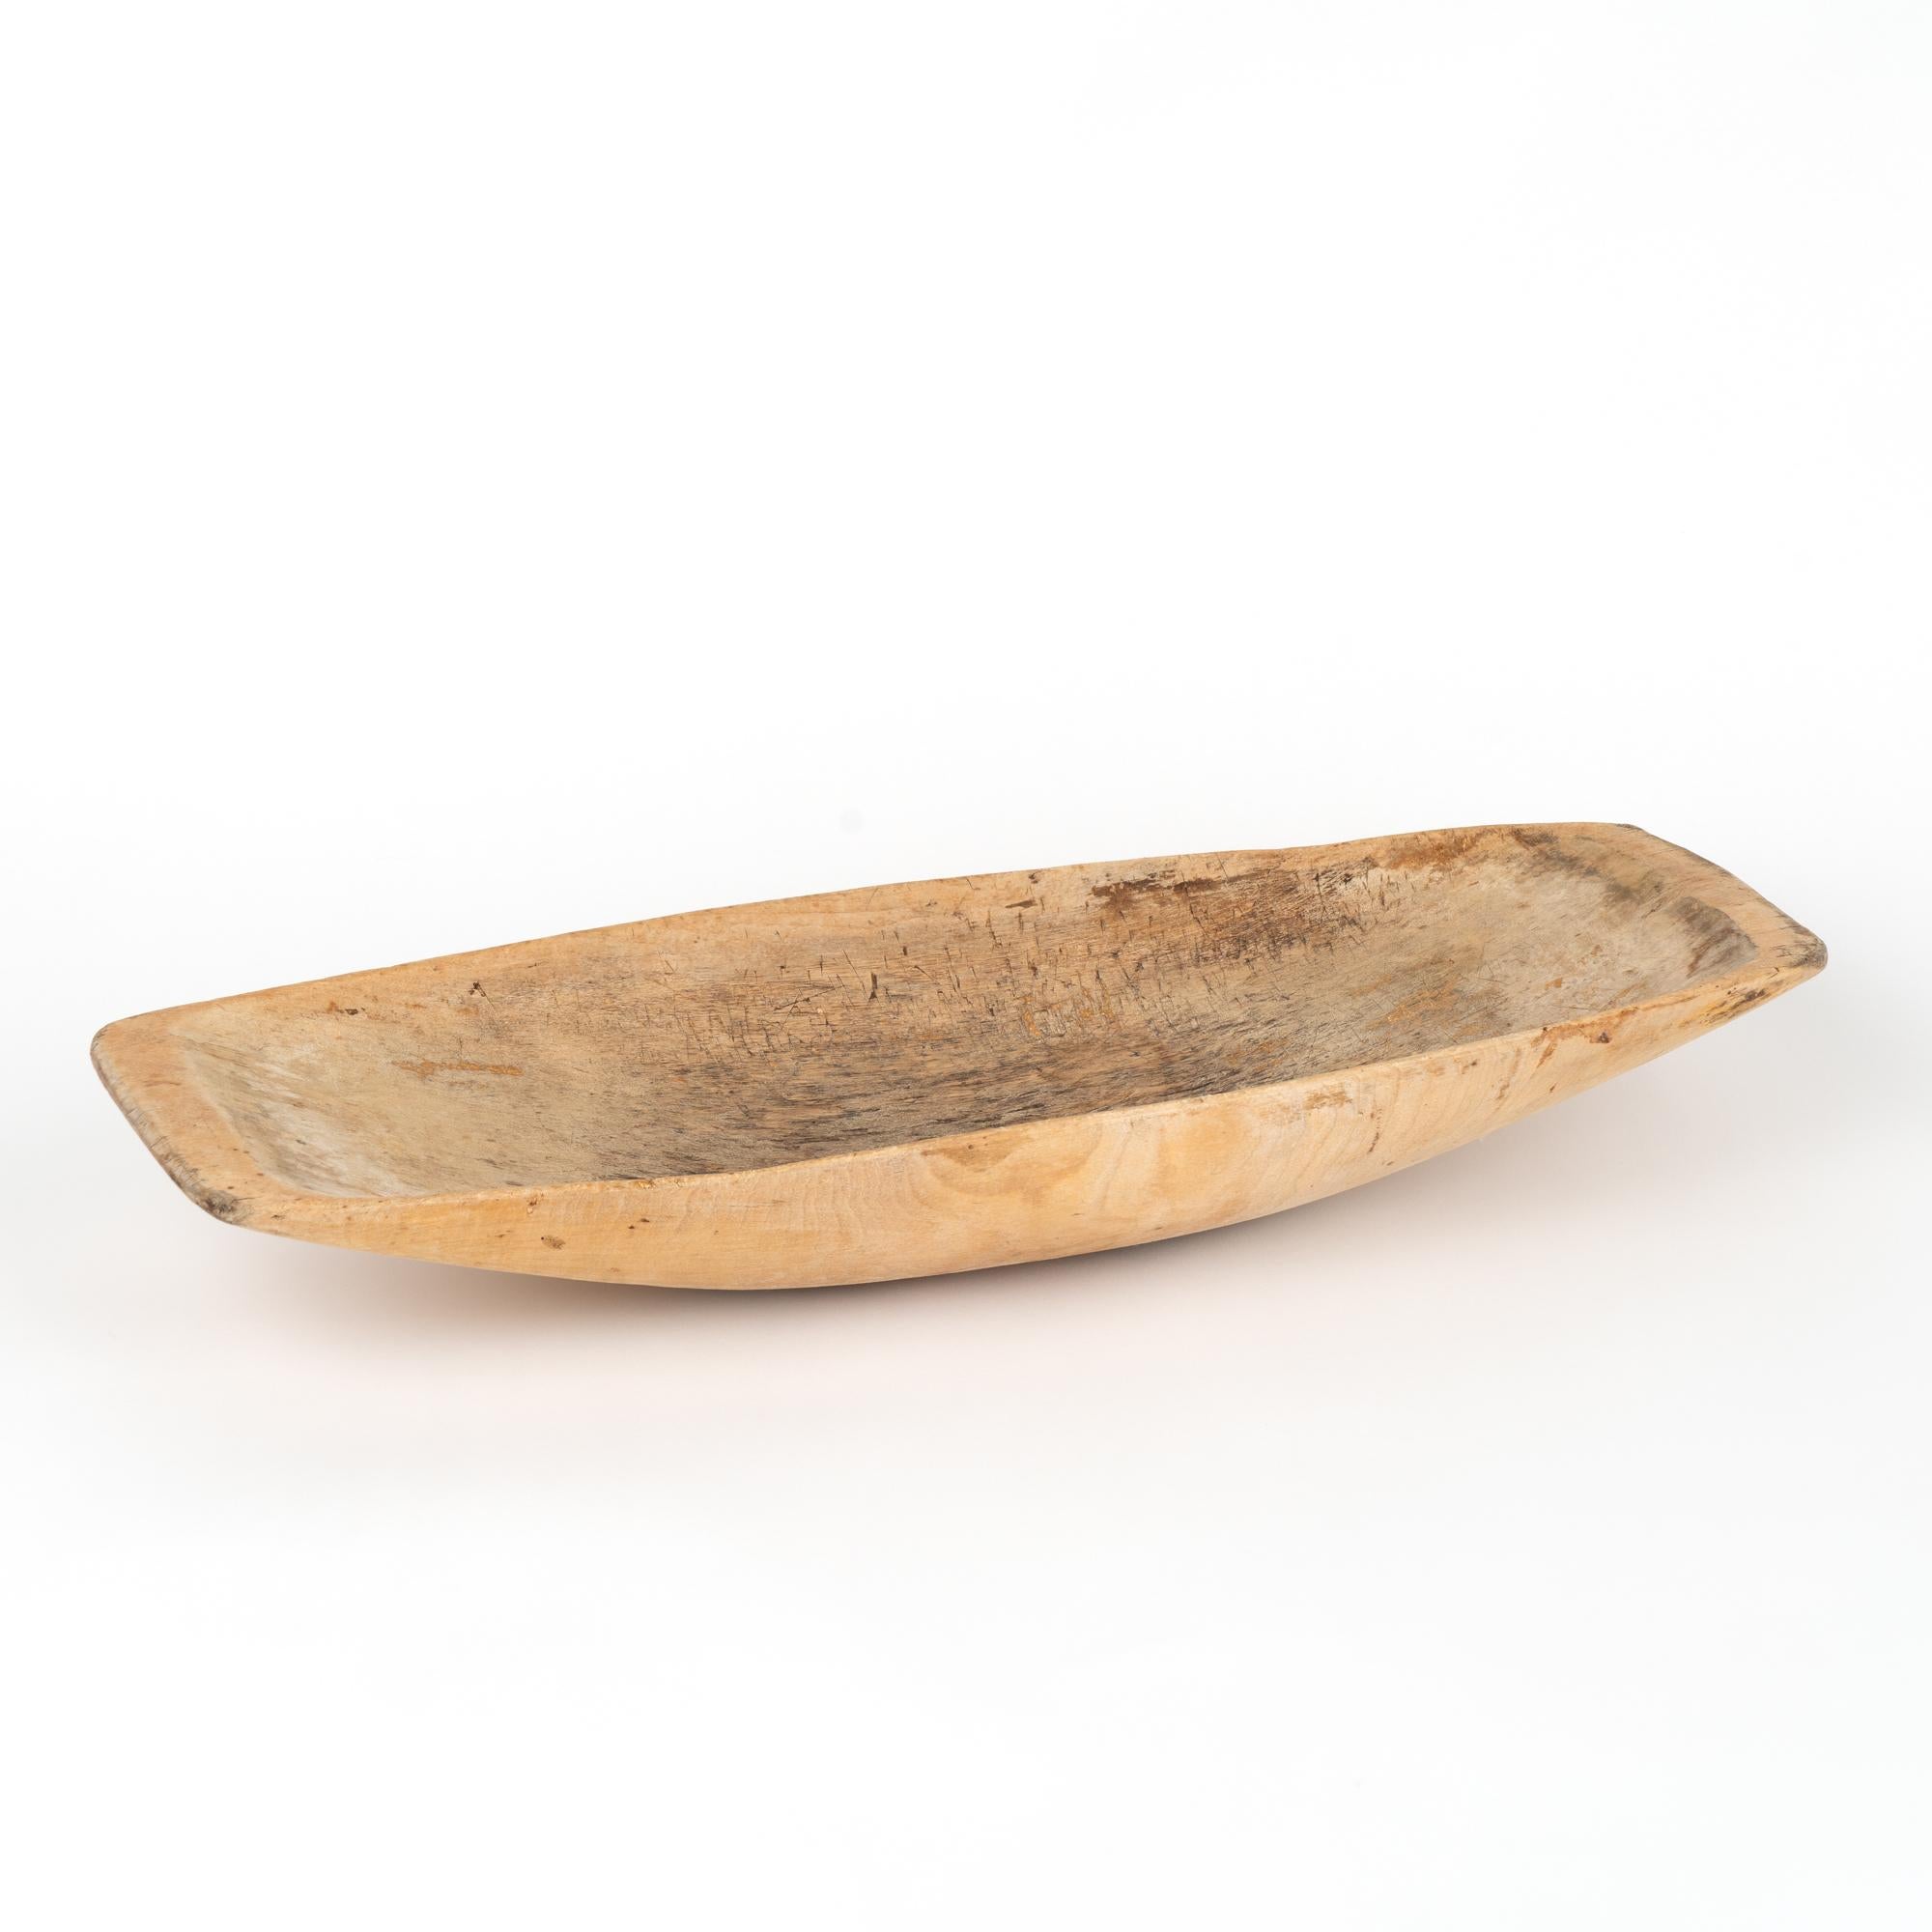 Original Swedish folk art pine carved wooden bowl with light patina. These bowls were used throughout families and often passed down generation to next generation. This bowl remains a highly functional item and now serve as a lovely decorative